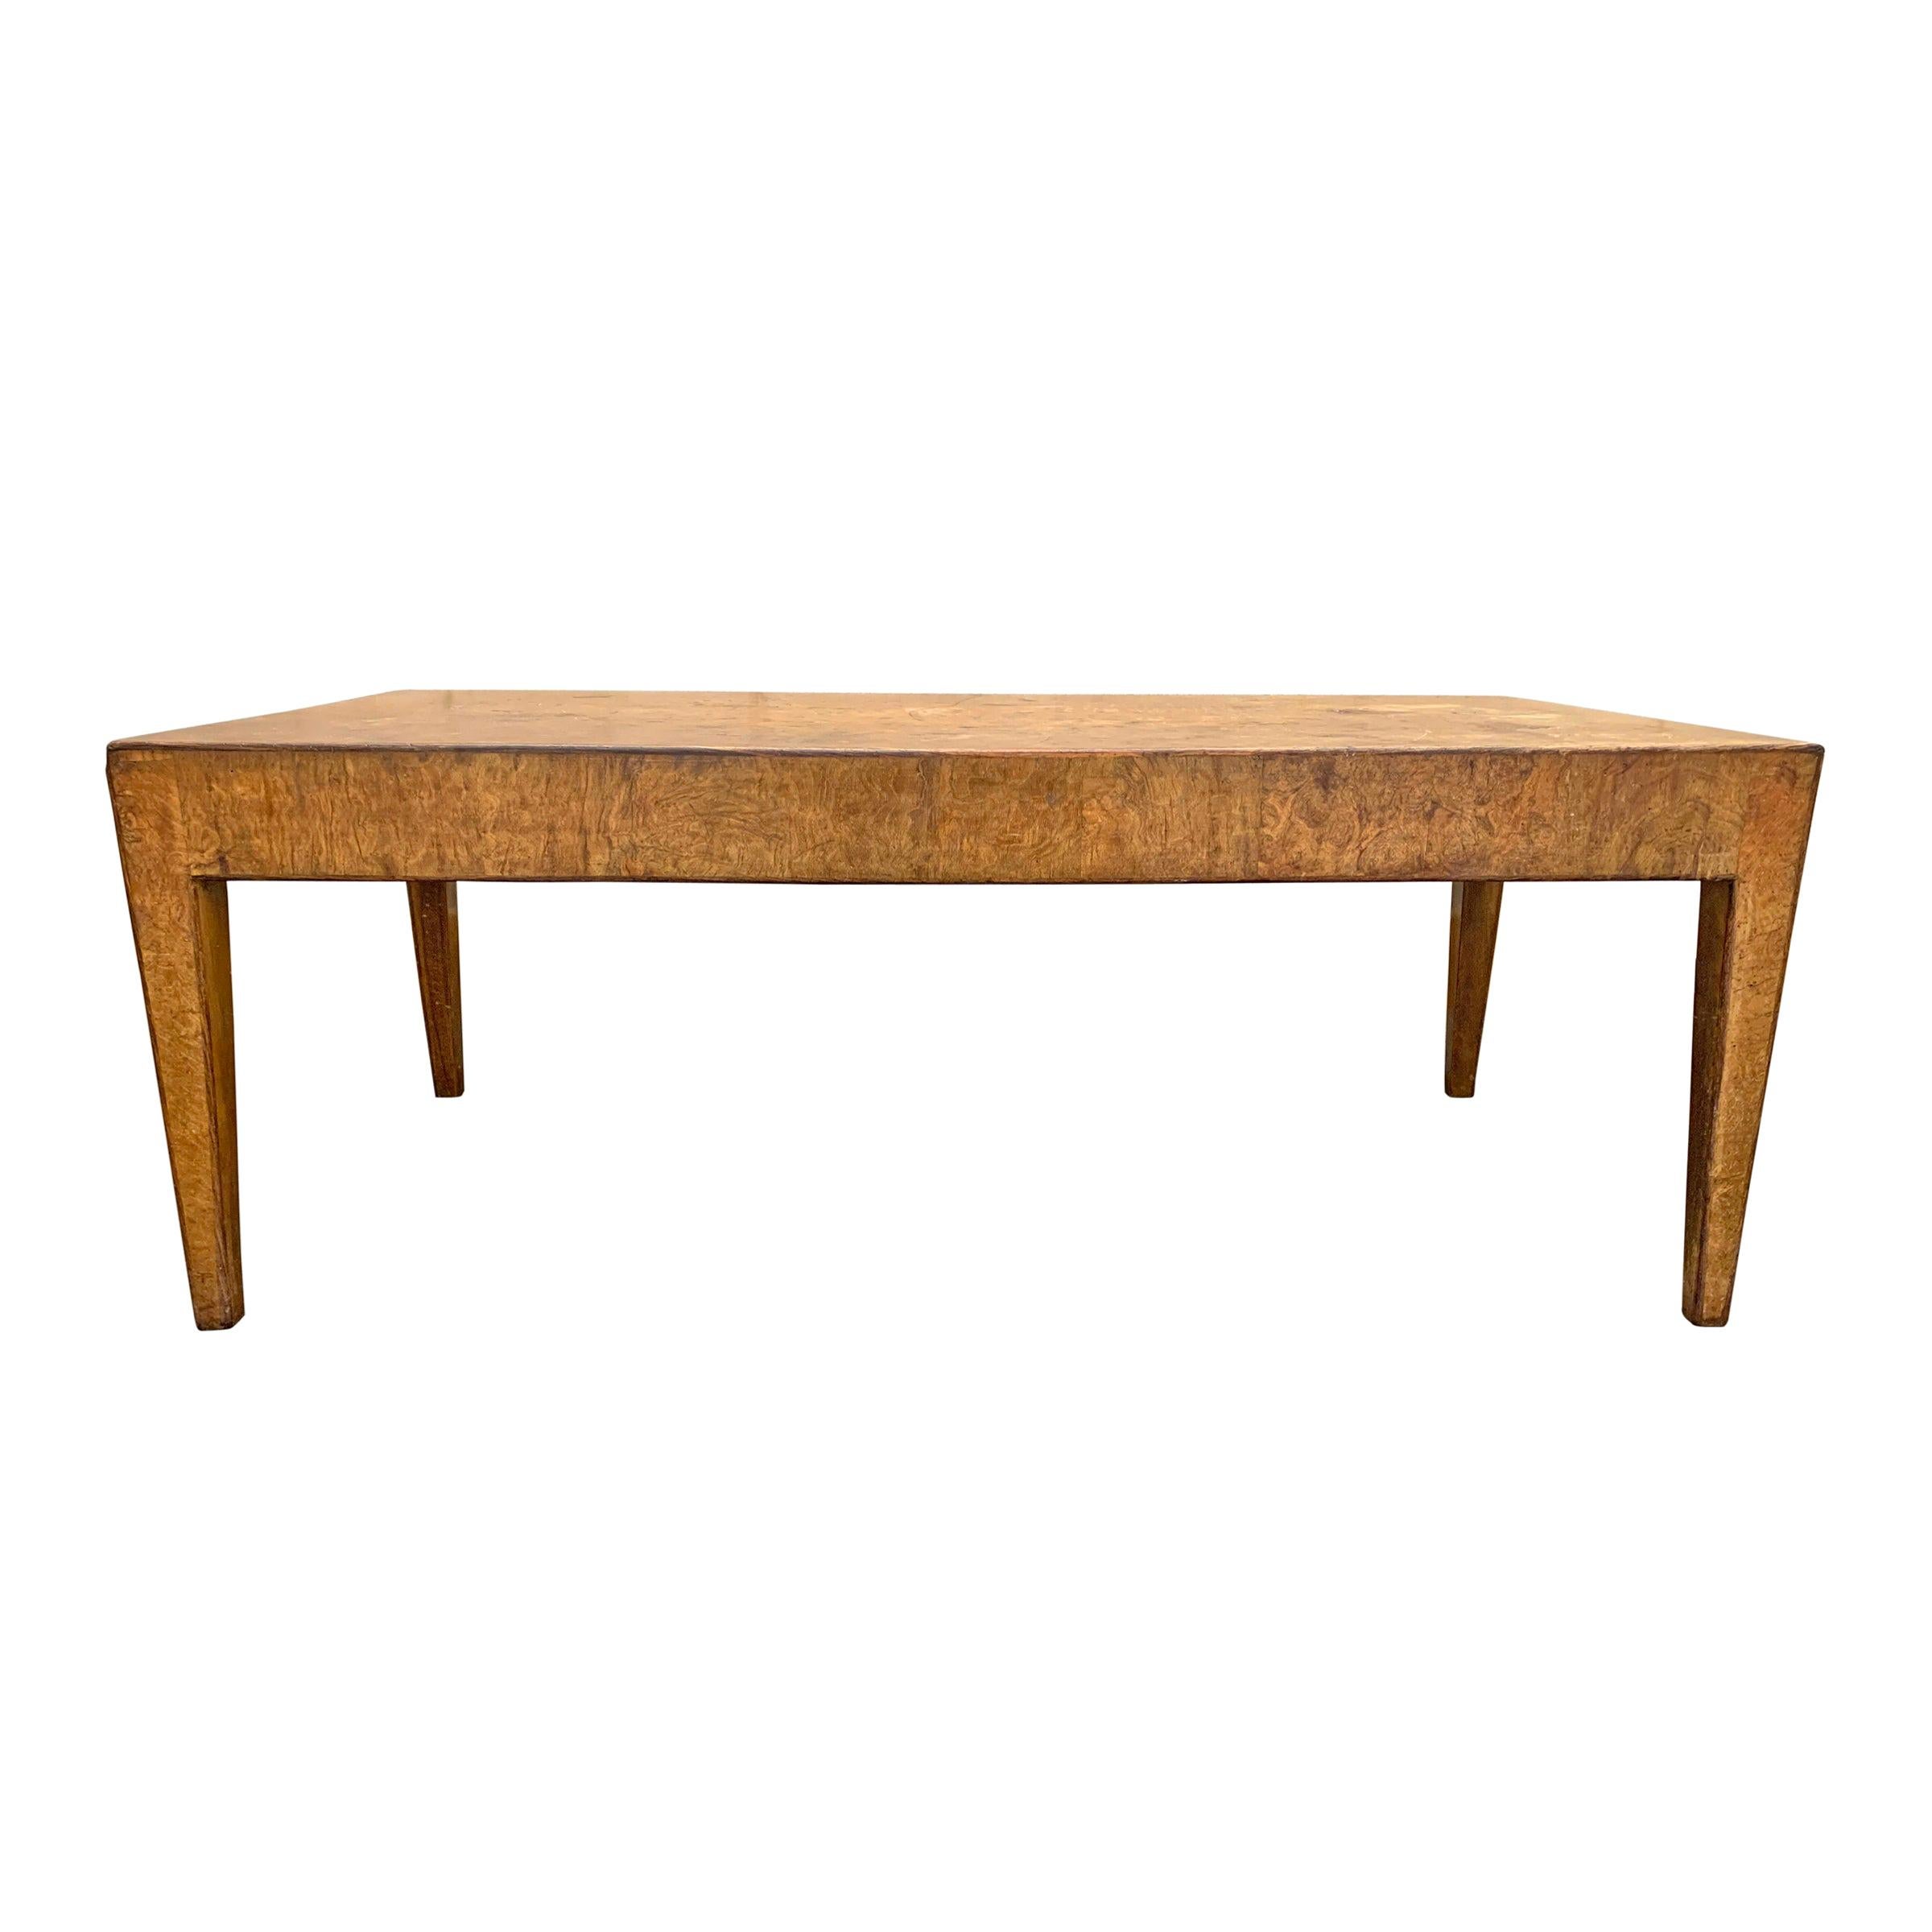 Mid-20th Century Burl Wood Low Table